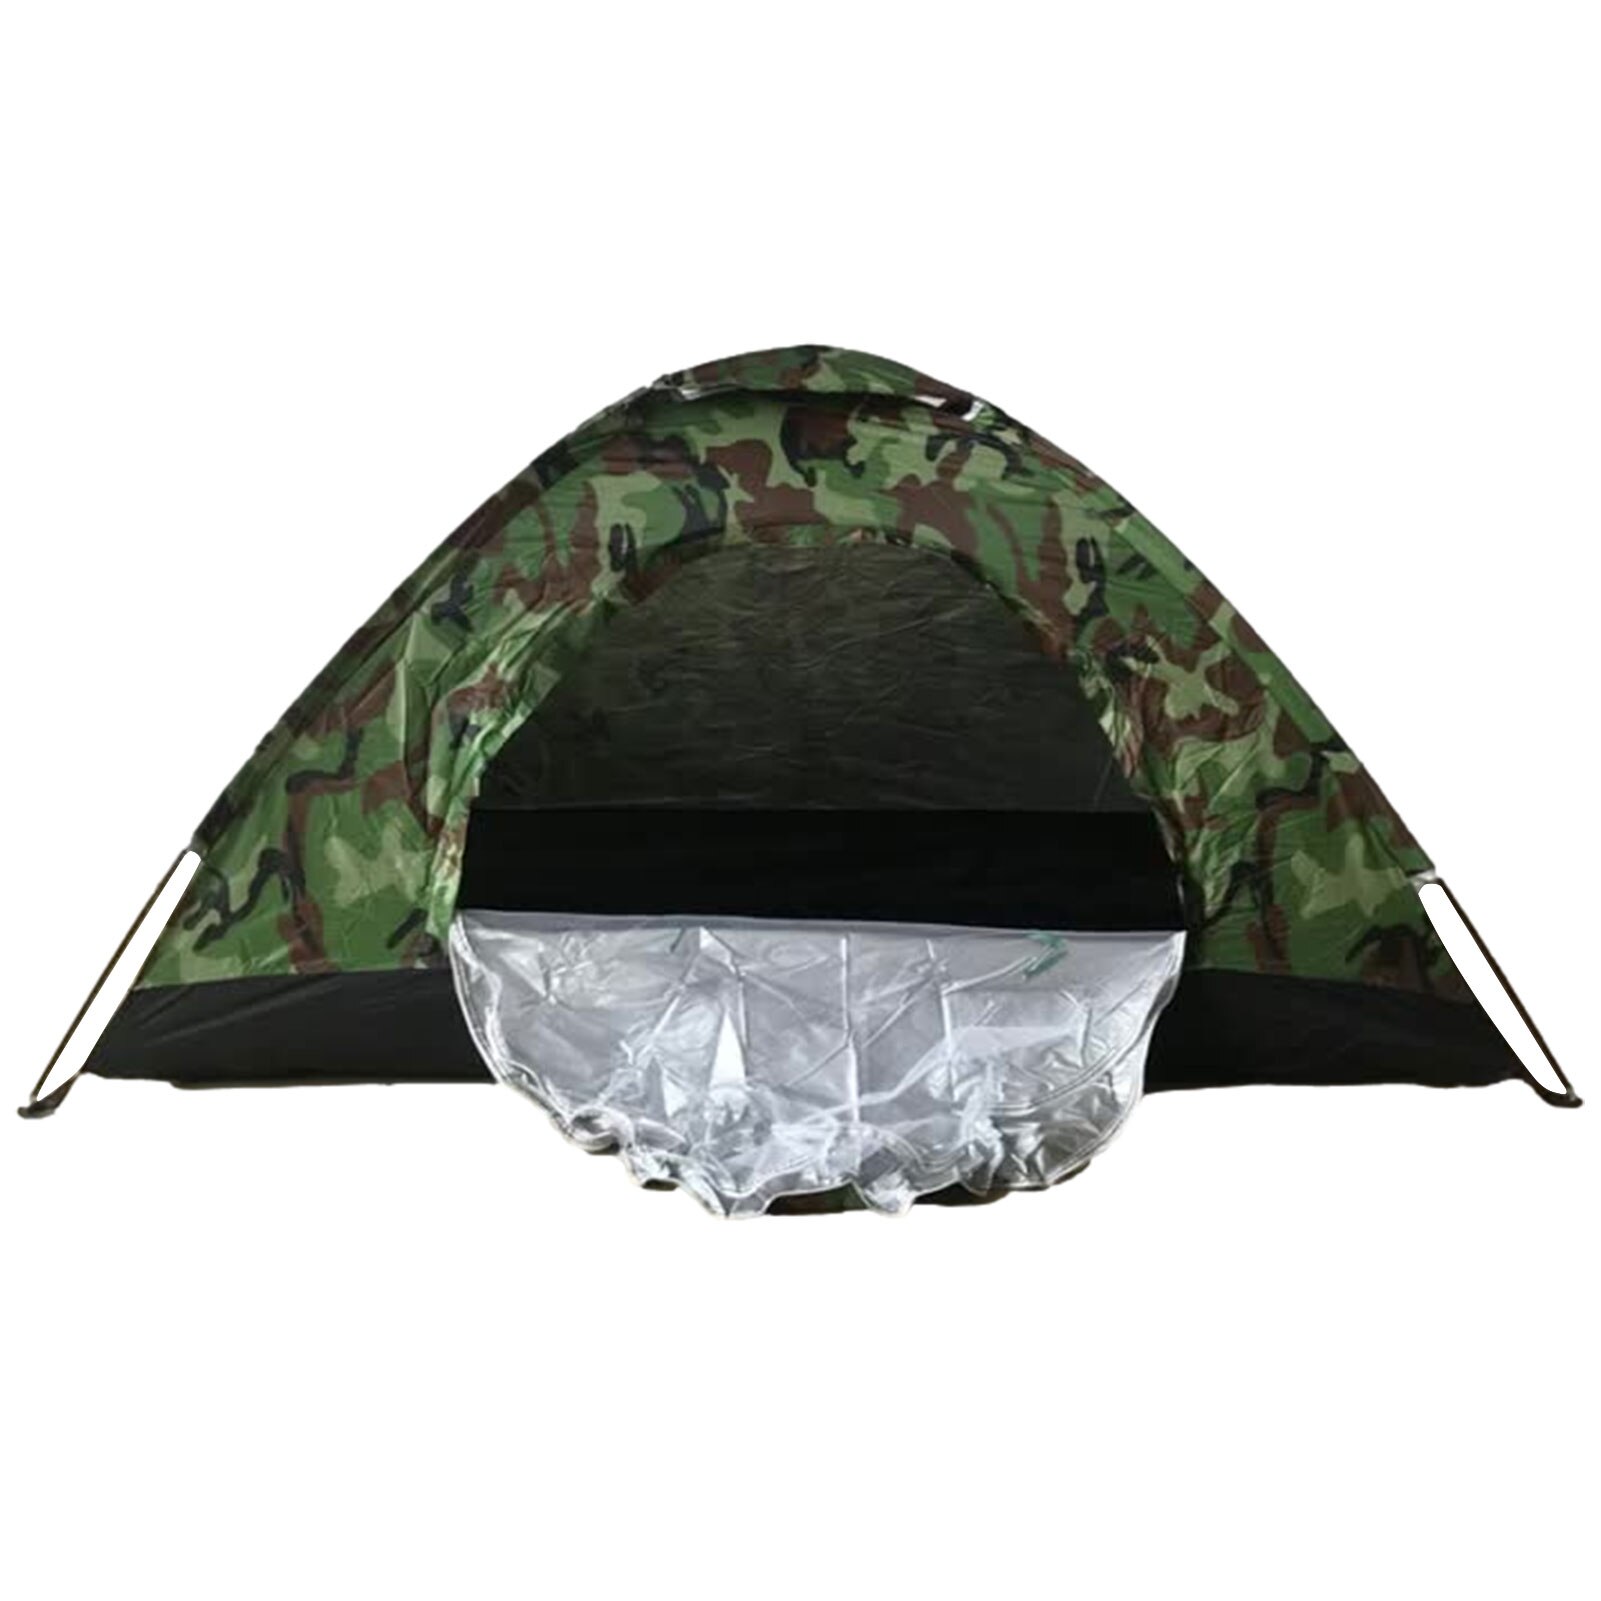 Cheap Goat Tents Single Layer Camping Camouflage Tent Outdoor Easy Setup Manual Family Travel Tent Lightweight Camping Tent For Outdoors